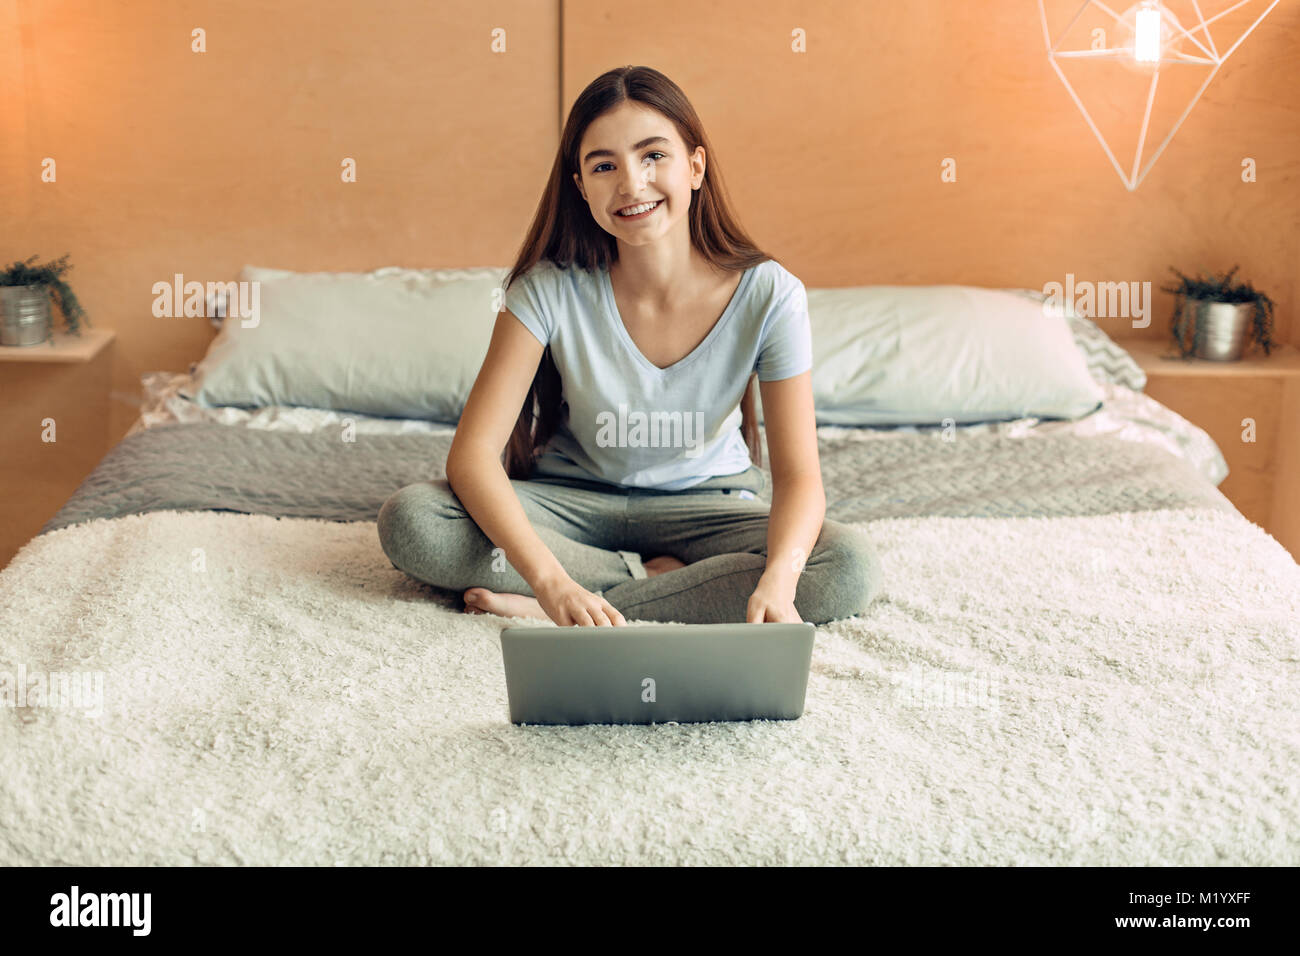 Adorable teenage girl smiling while using her laptop Banque D'Images